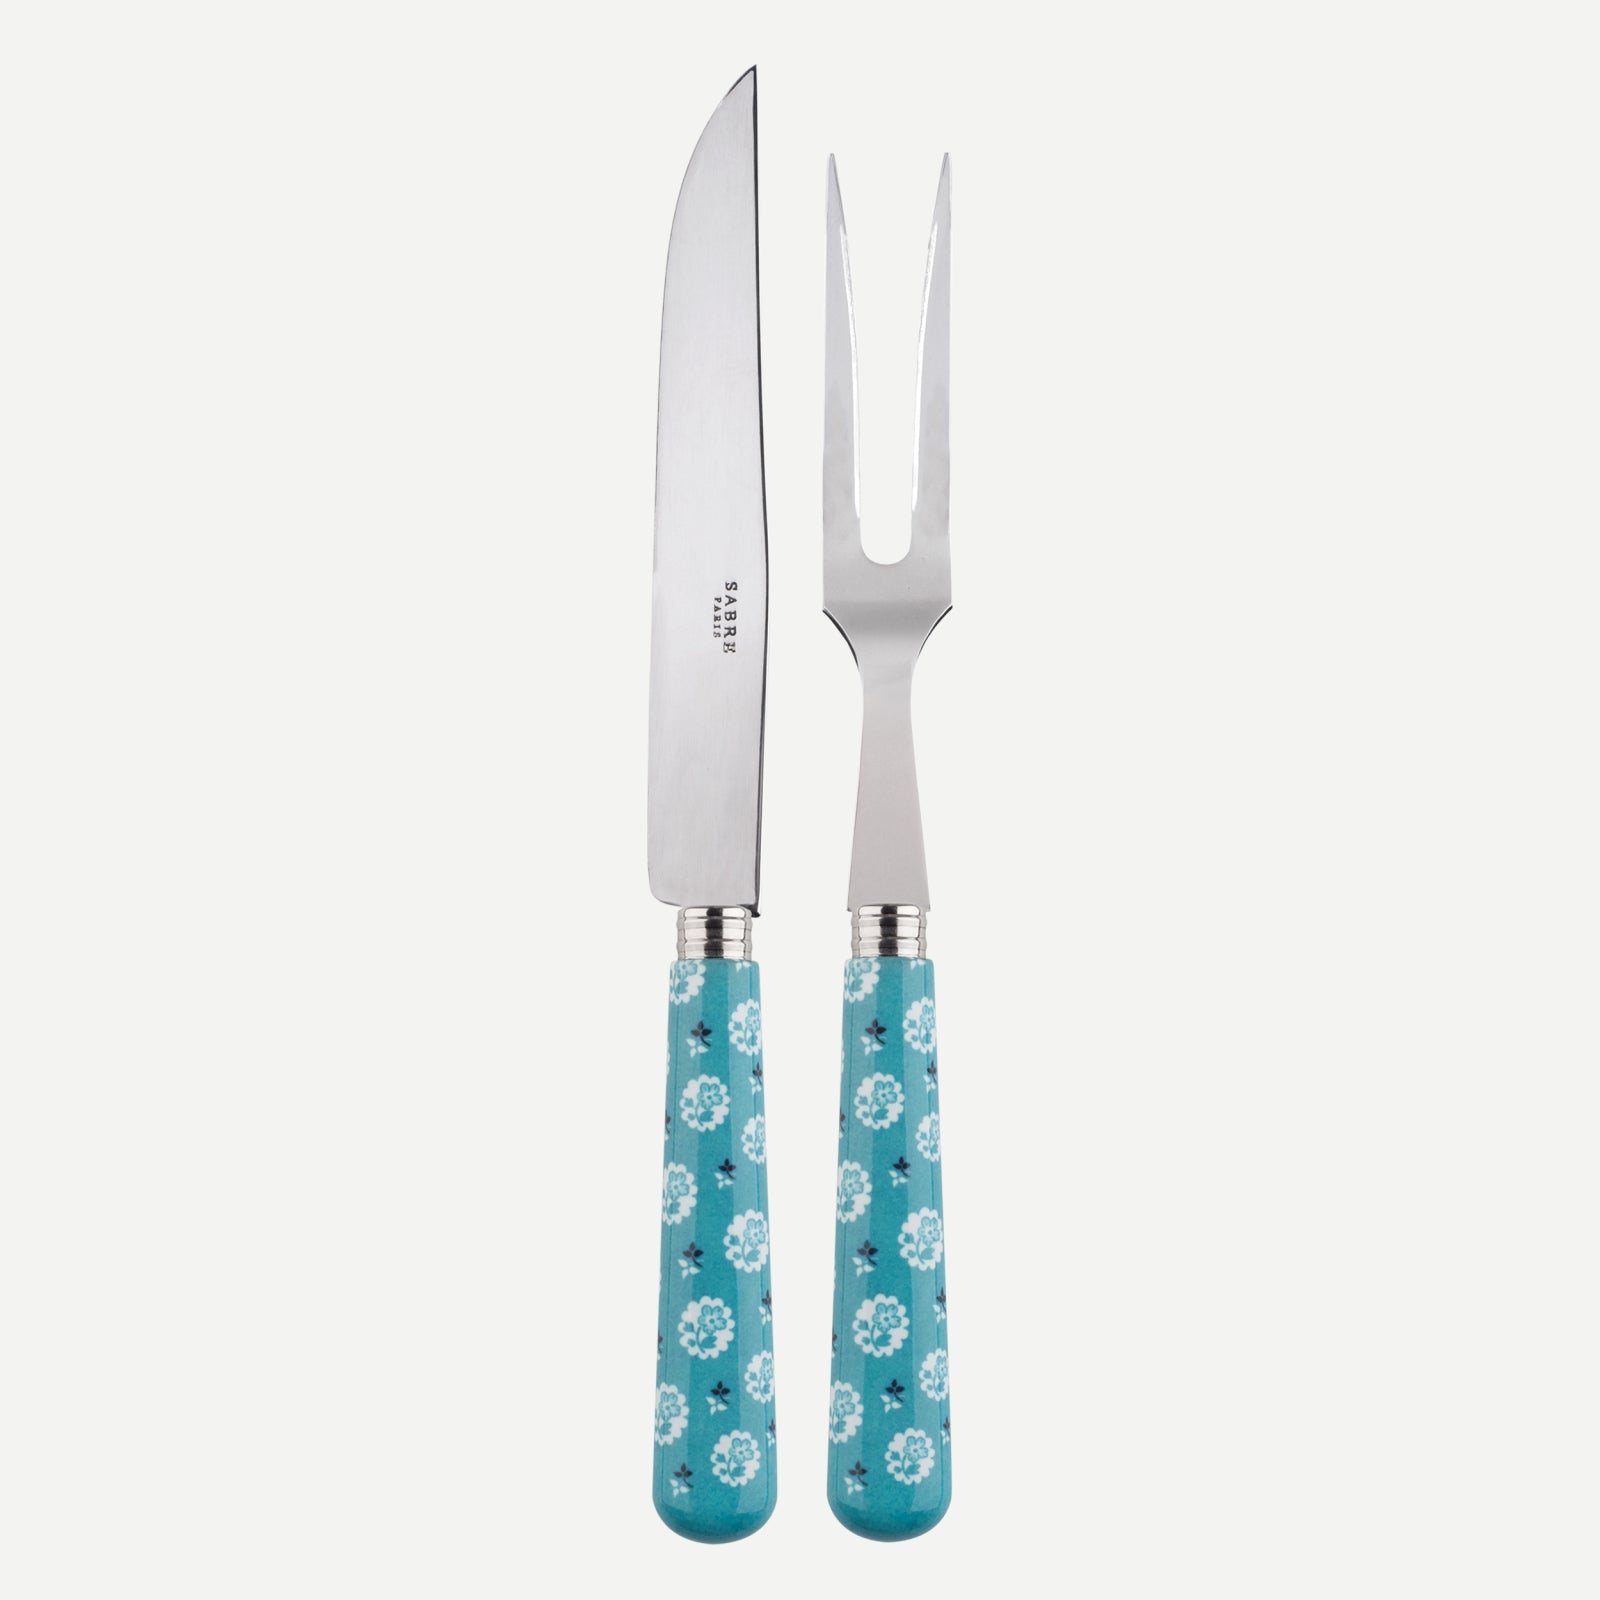 Carving set - Provencal - Turquoise